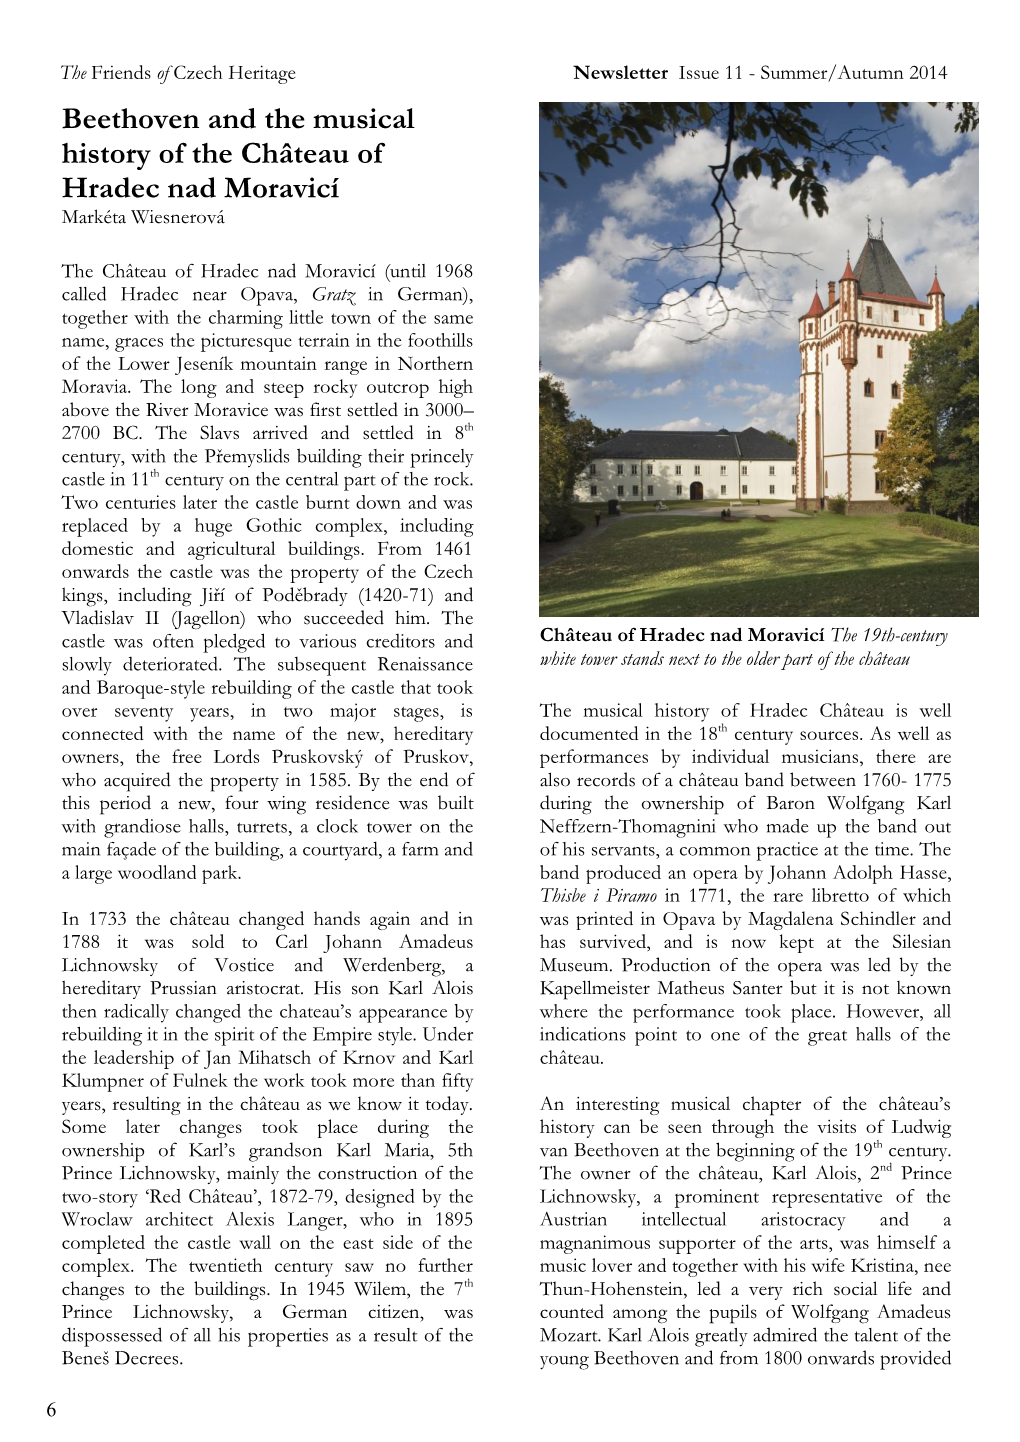 Beethoven and the Musical History of the Château of Hradec Nad Moravicí Markéta Wiesnerová